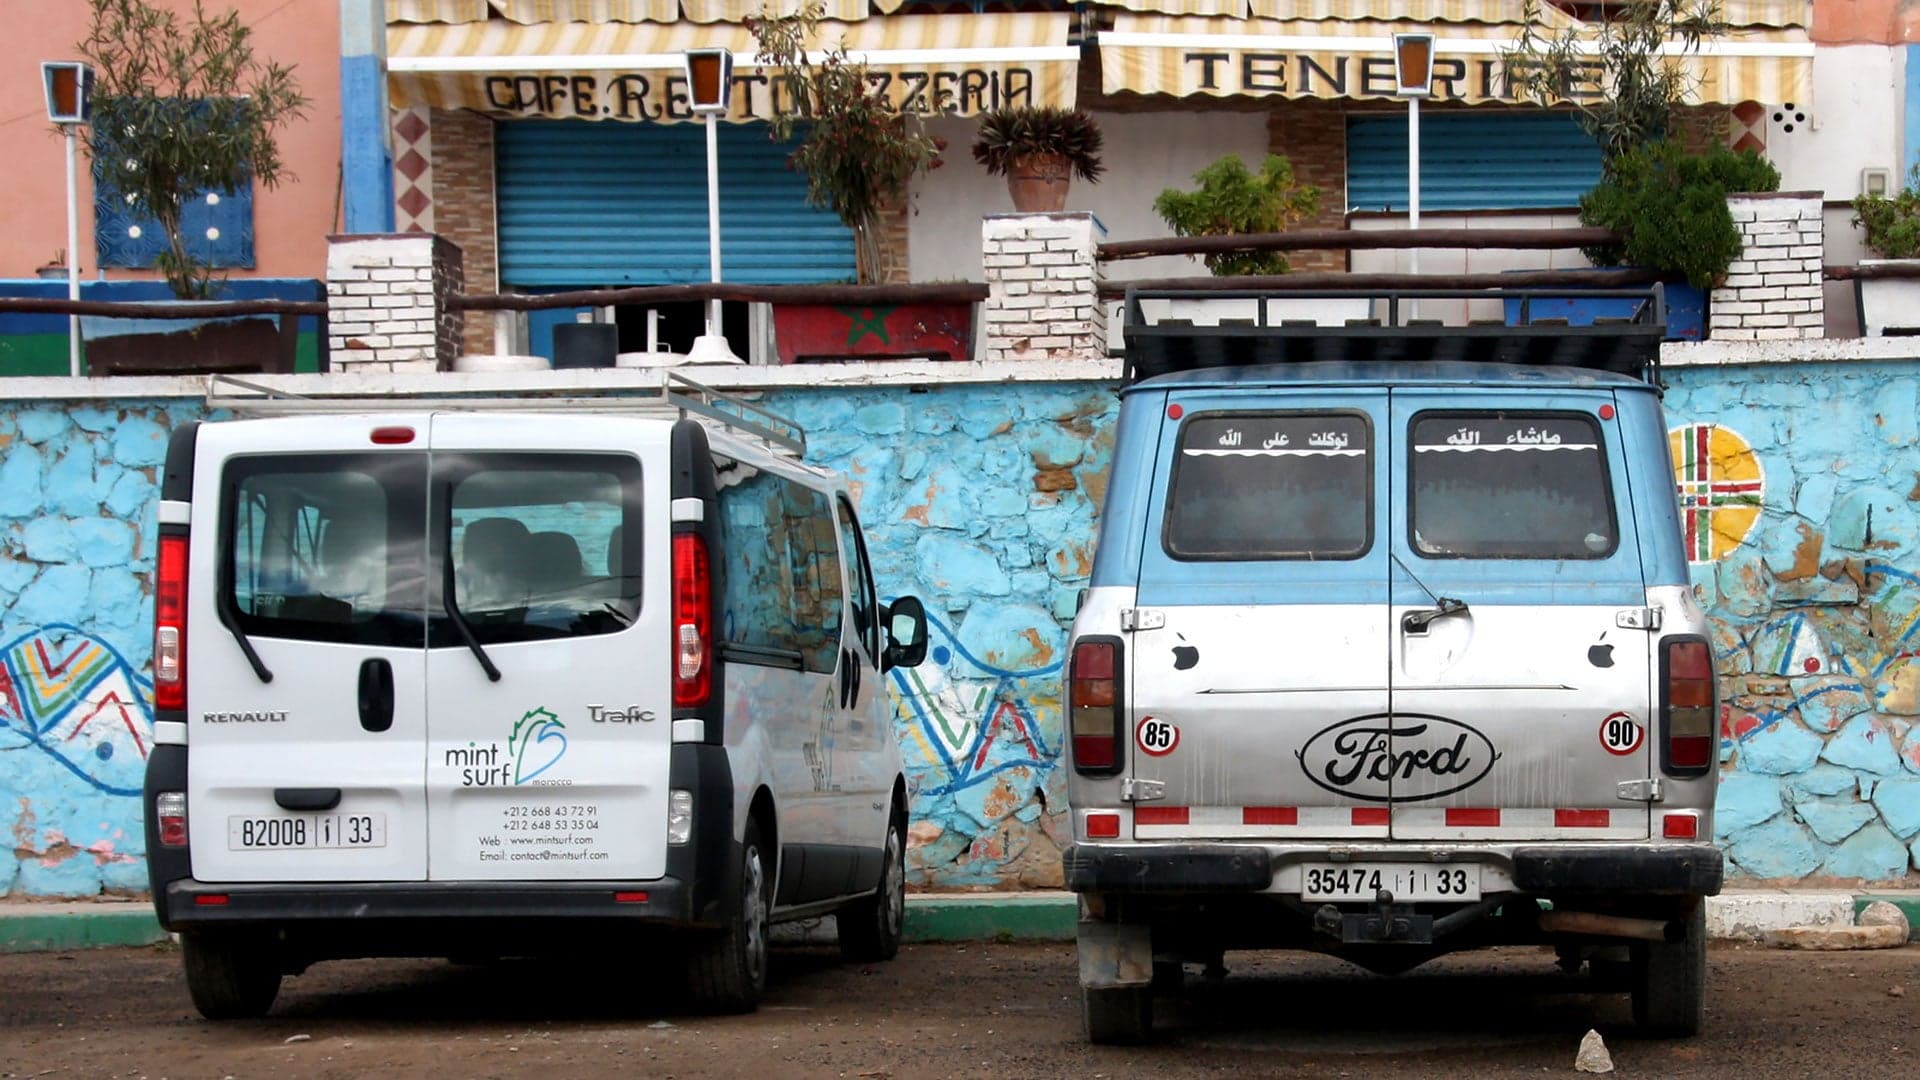 Ford Transit Vans Are Morocco’s Living Rooms